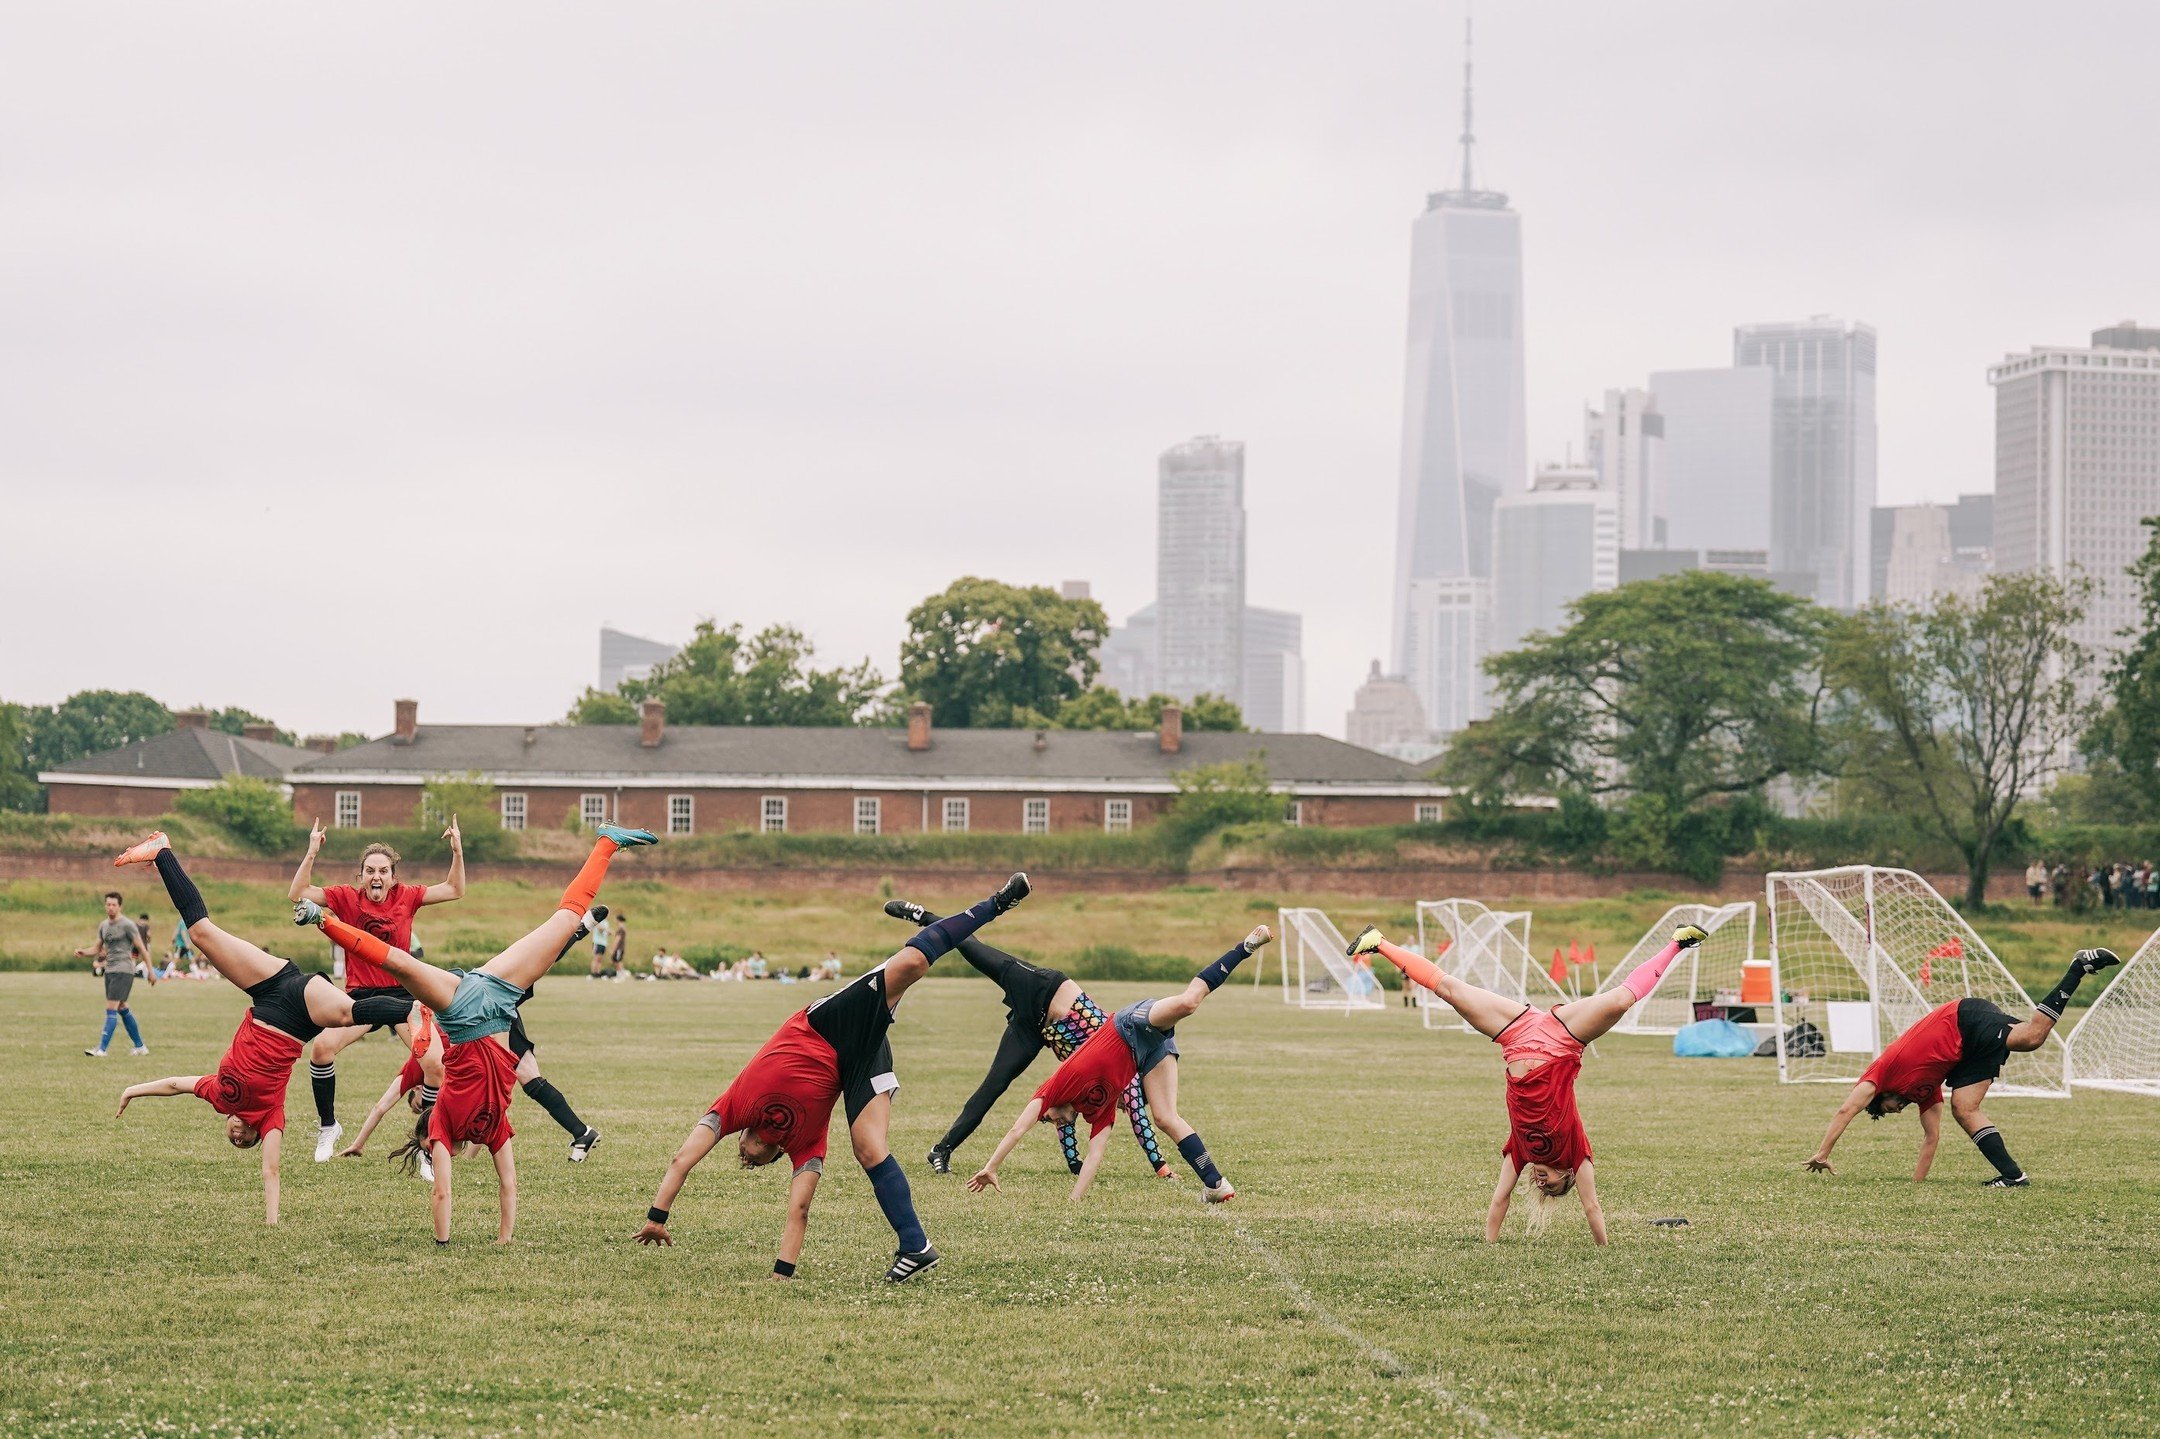 With these new Manhattan congestion prices... you might actually find us cart-wheeling our way to Governors Island this year 🤸🤸&zwj;♂️🤸&zwj;♀️

#govcup #govenorscup #govcup2024 #govenorsisland #nycfooty #newyorkcity